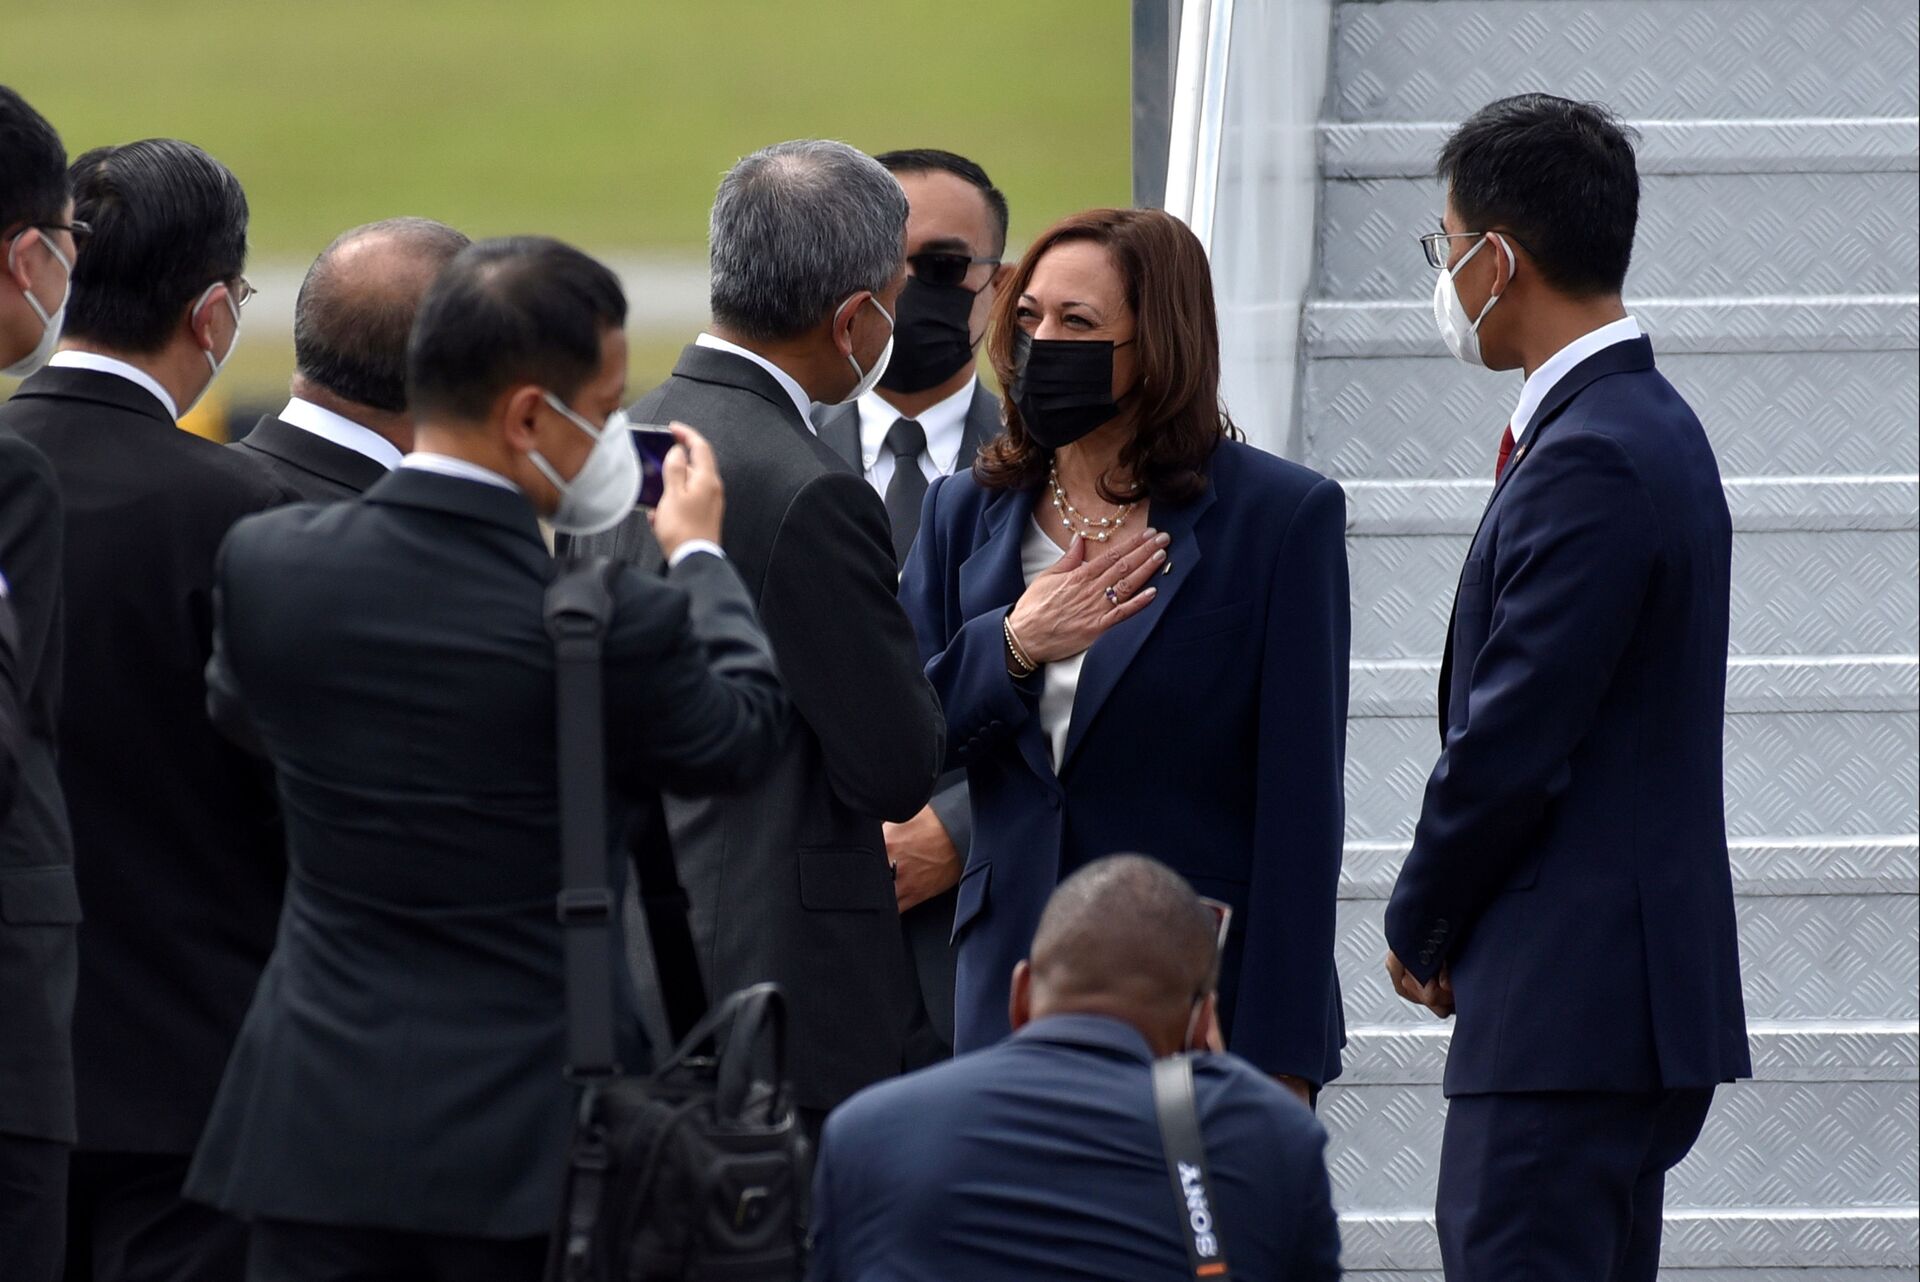 U.S. Vice President Kamala Harris is greeted by Singapore Foreign Minister Vivian Balakrishnan and his delegation, as she arrived at Paya Lebar Air Base in Singapore August 22, 2021 - Sputnik International, 1920, 07.09.2021